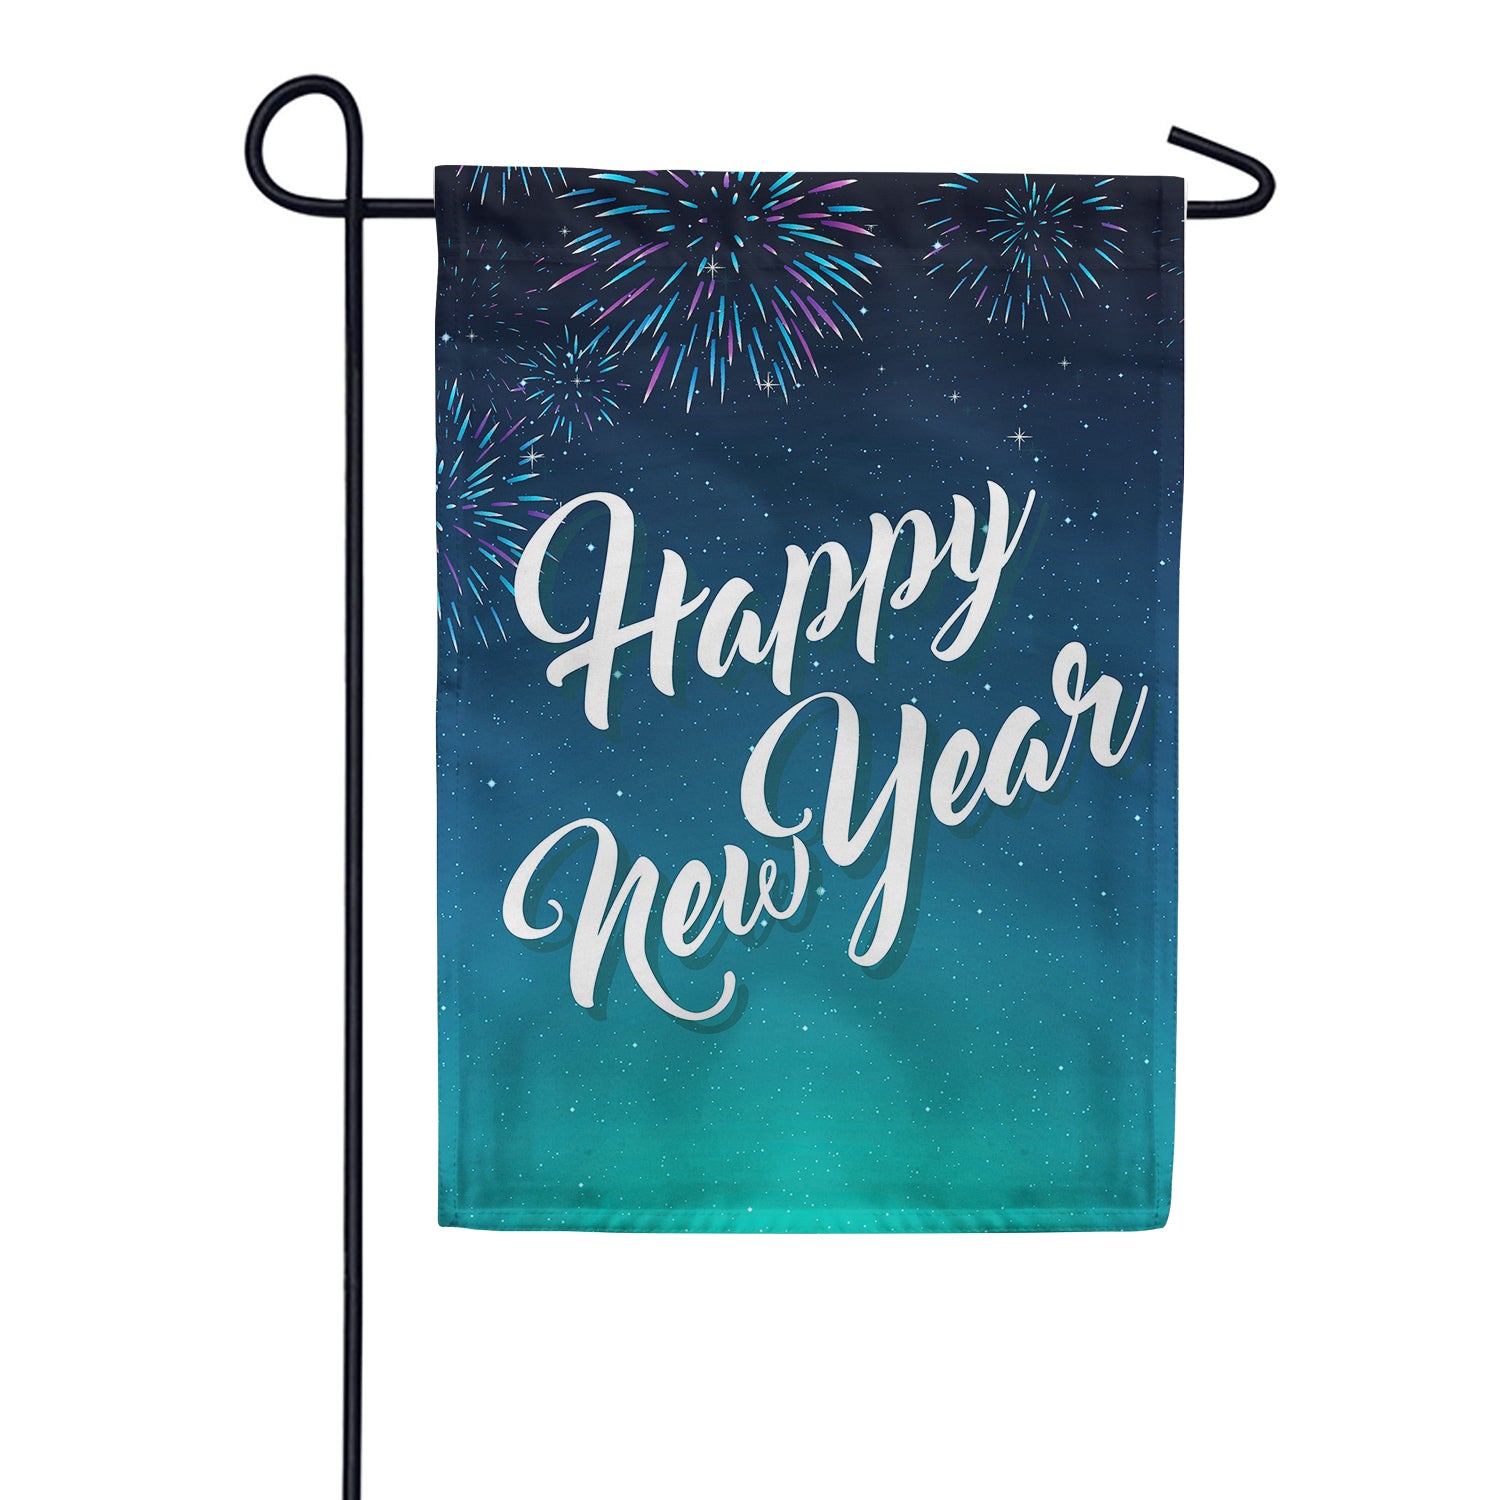 Bring In The New Year Double Sided Garden Flag